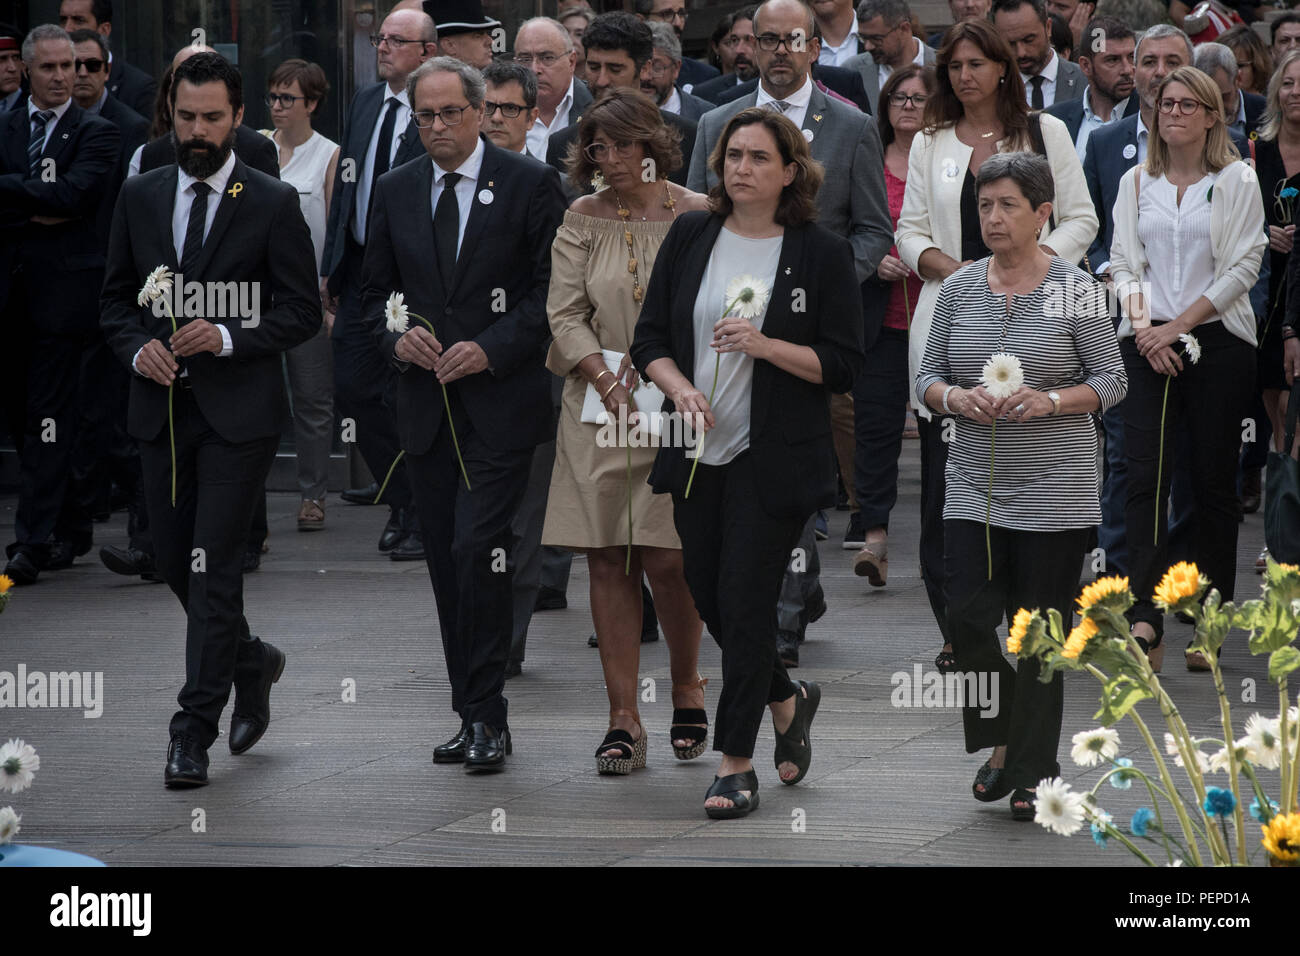 Barcelona, Spain. 17th Aug 2018. August 17, 2018 - Barcelona, Catalonia, Spain - Local authorities   Roger Torrent, President of the Parliament of Catalonia, Quim Torra President of Catalonia, Ada Colau,  Mayor and Teresa Cunillera, Spain's Governemnt delegate in Catalonia   pay tribute in Las Ramblas of Barcelona after one year of the  terror attacks  that  killed  16 people and injured more than 120  when two vehicles crashed into the crowds. Credit:  Jordi Boixareu/Alamy Live News Stock Photo